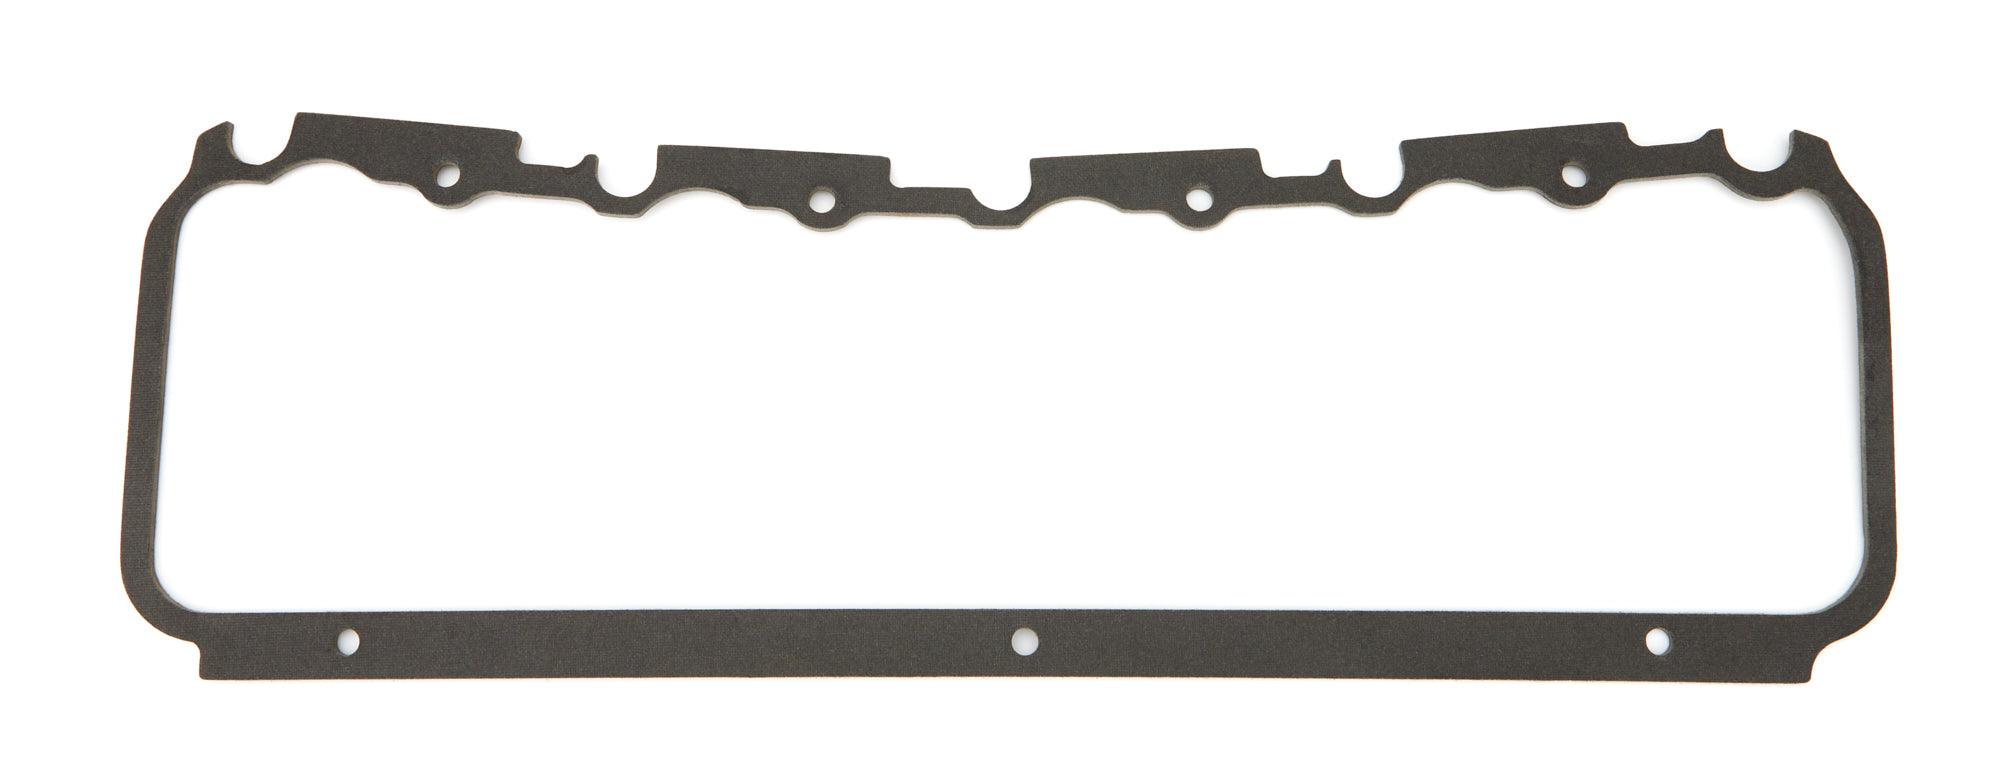 Valve Cover Gasket 1pk DN-9 Cyl. Head - Burlile Performance Products